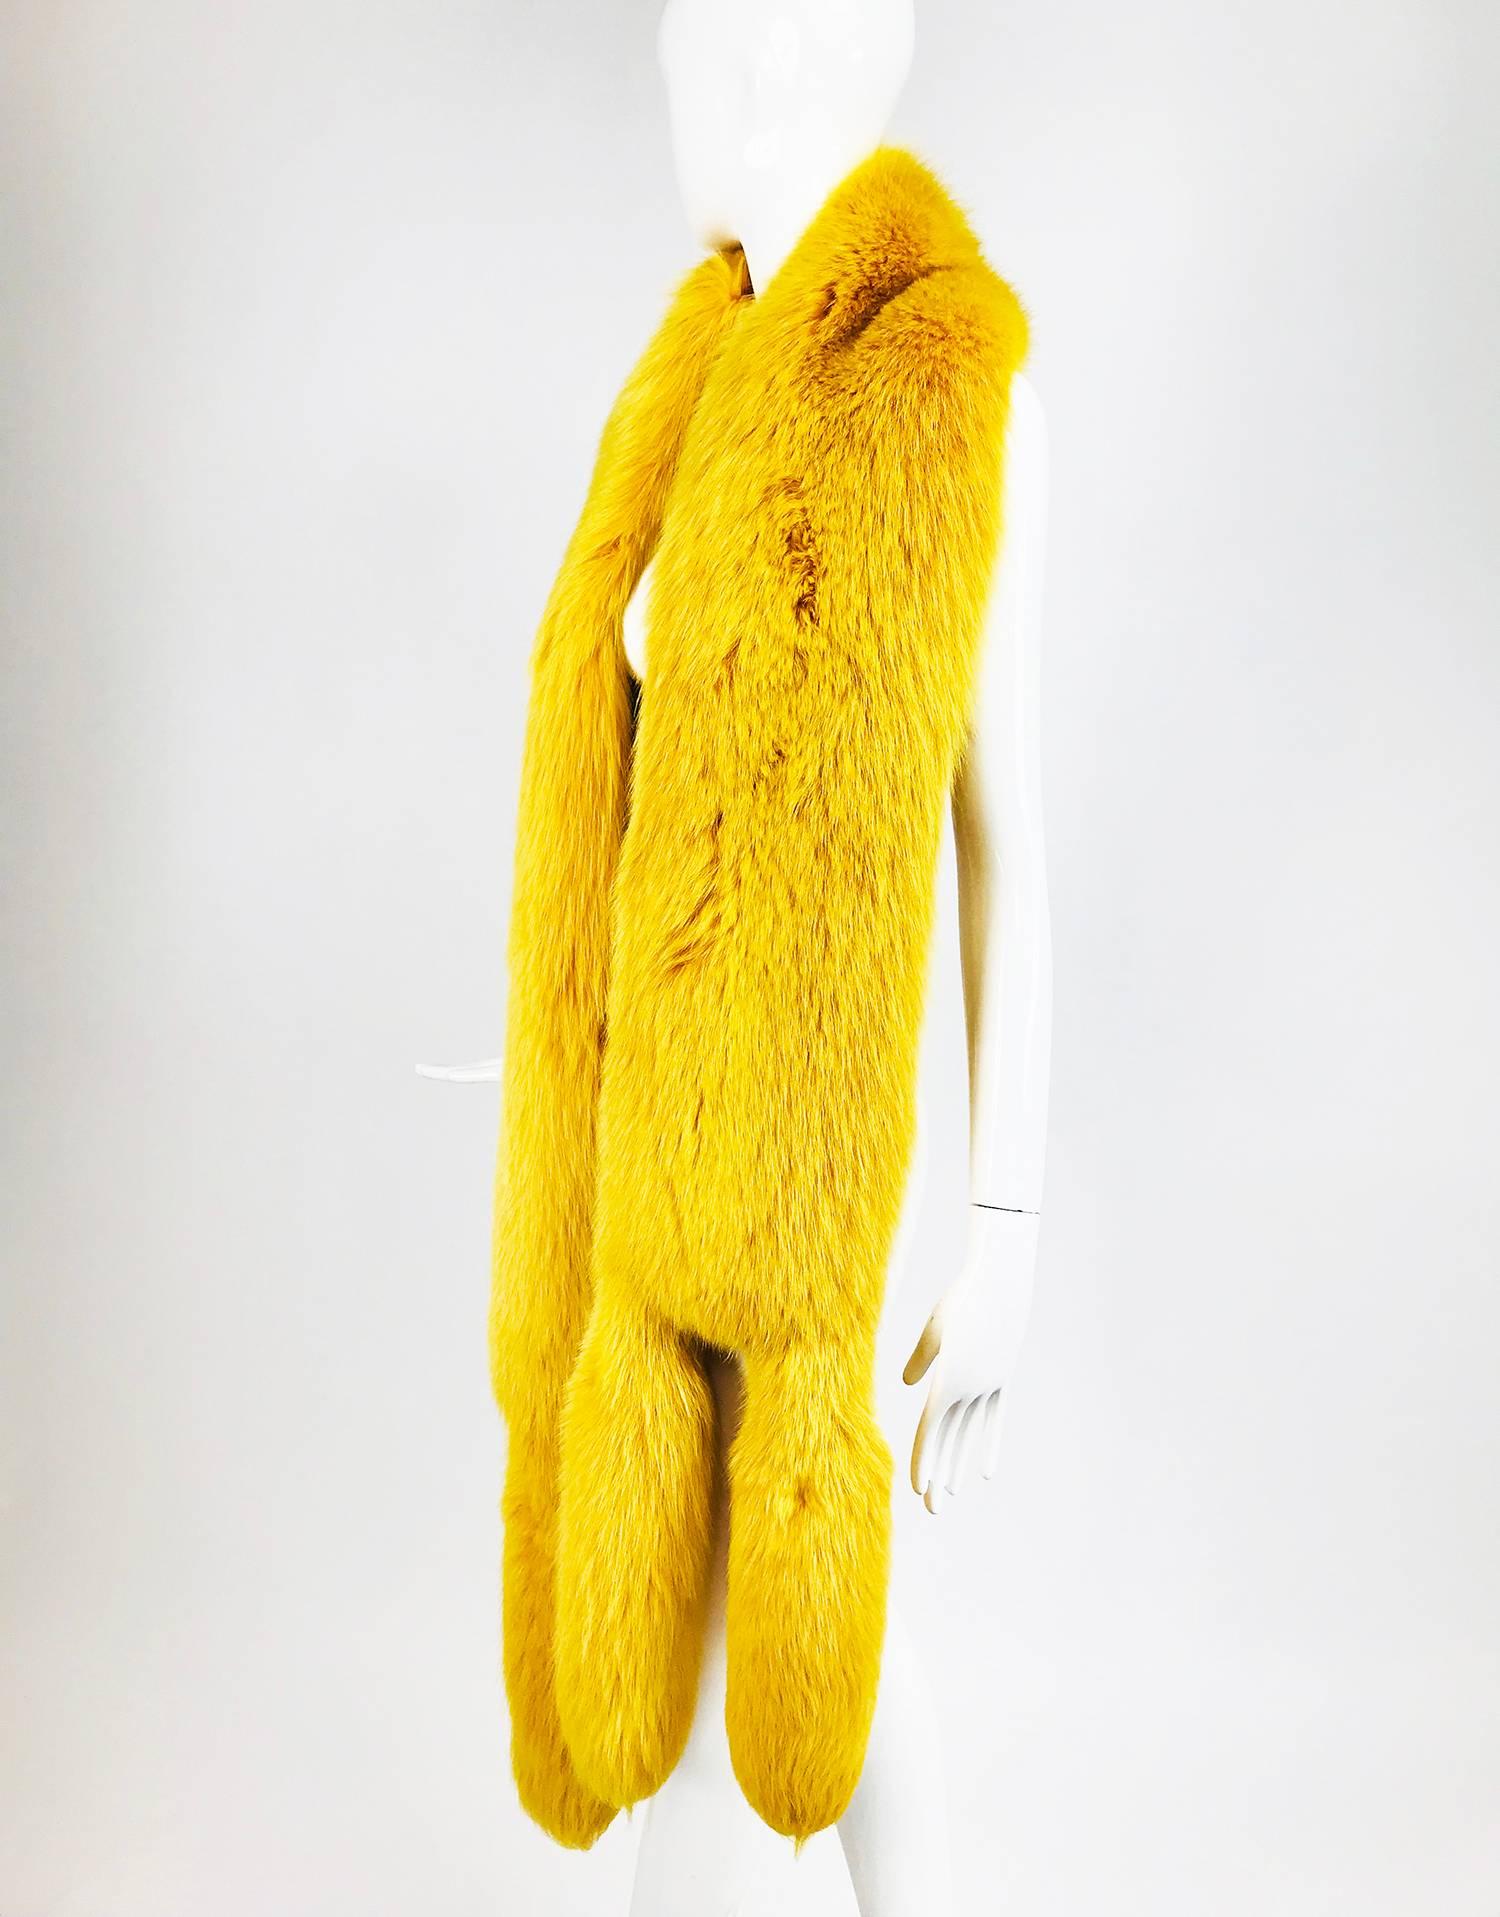 Saffron yellow fox fur stole with tails 1980s...Beautiful and unusual, this stole is wide and long...The fur is thick and in excellent condition...Lined in Saffron cut velvet and brocade...

In excellent wearable condition... All our clothing is dry